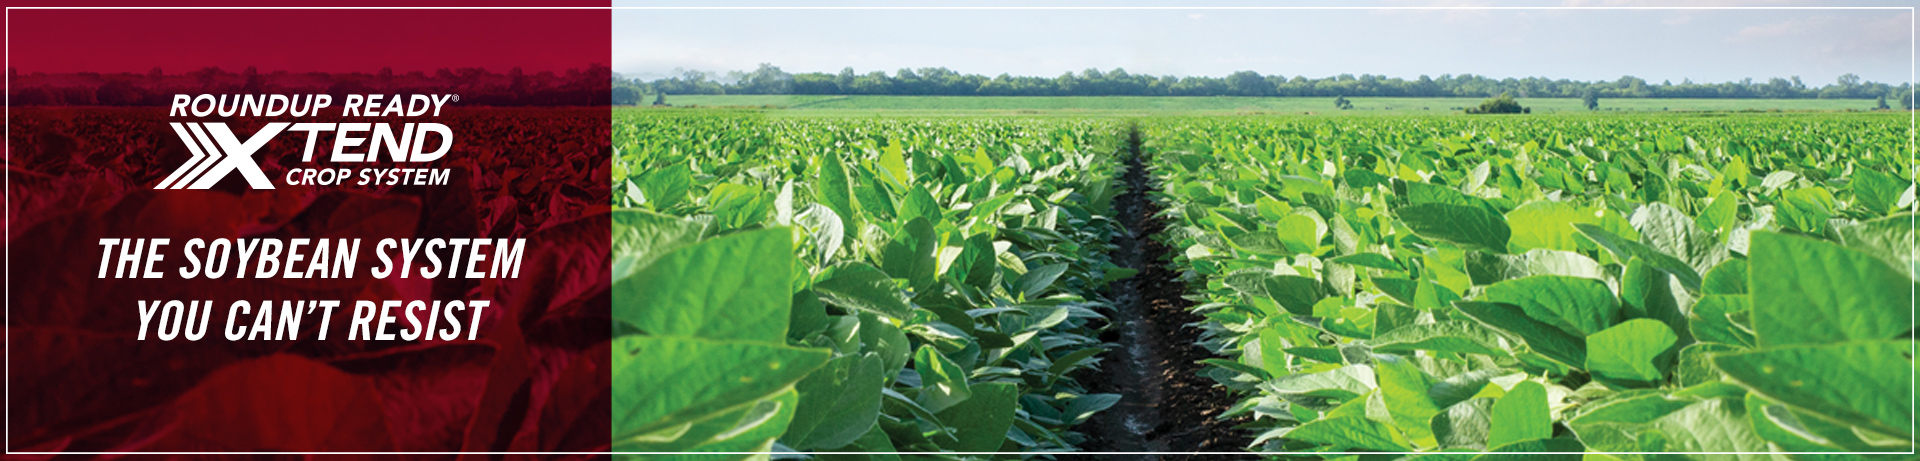 Roundup Ready Xtend Crop System - The soybean system you can't resist